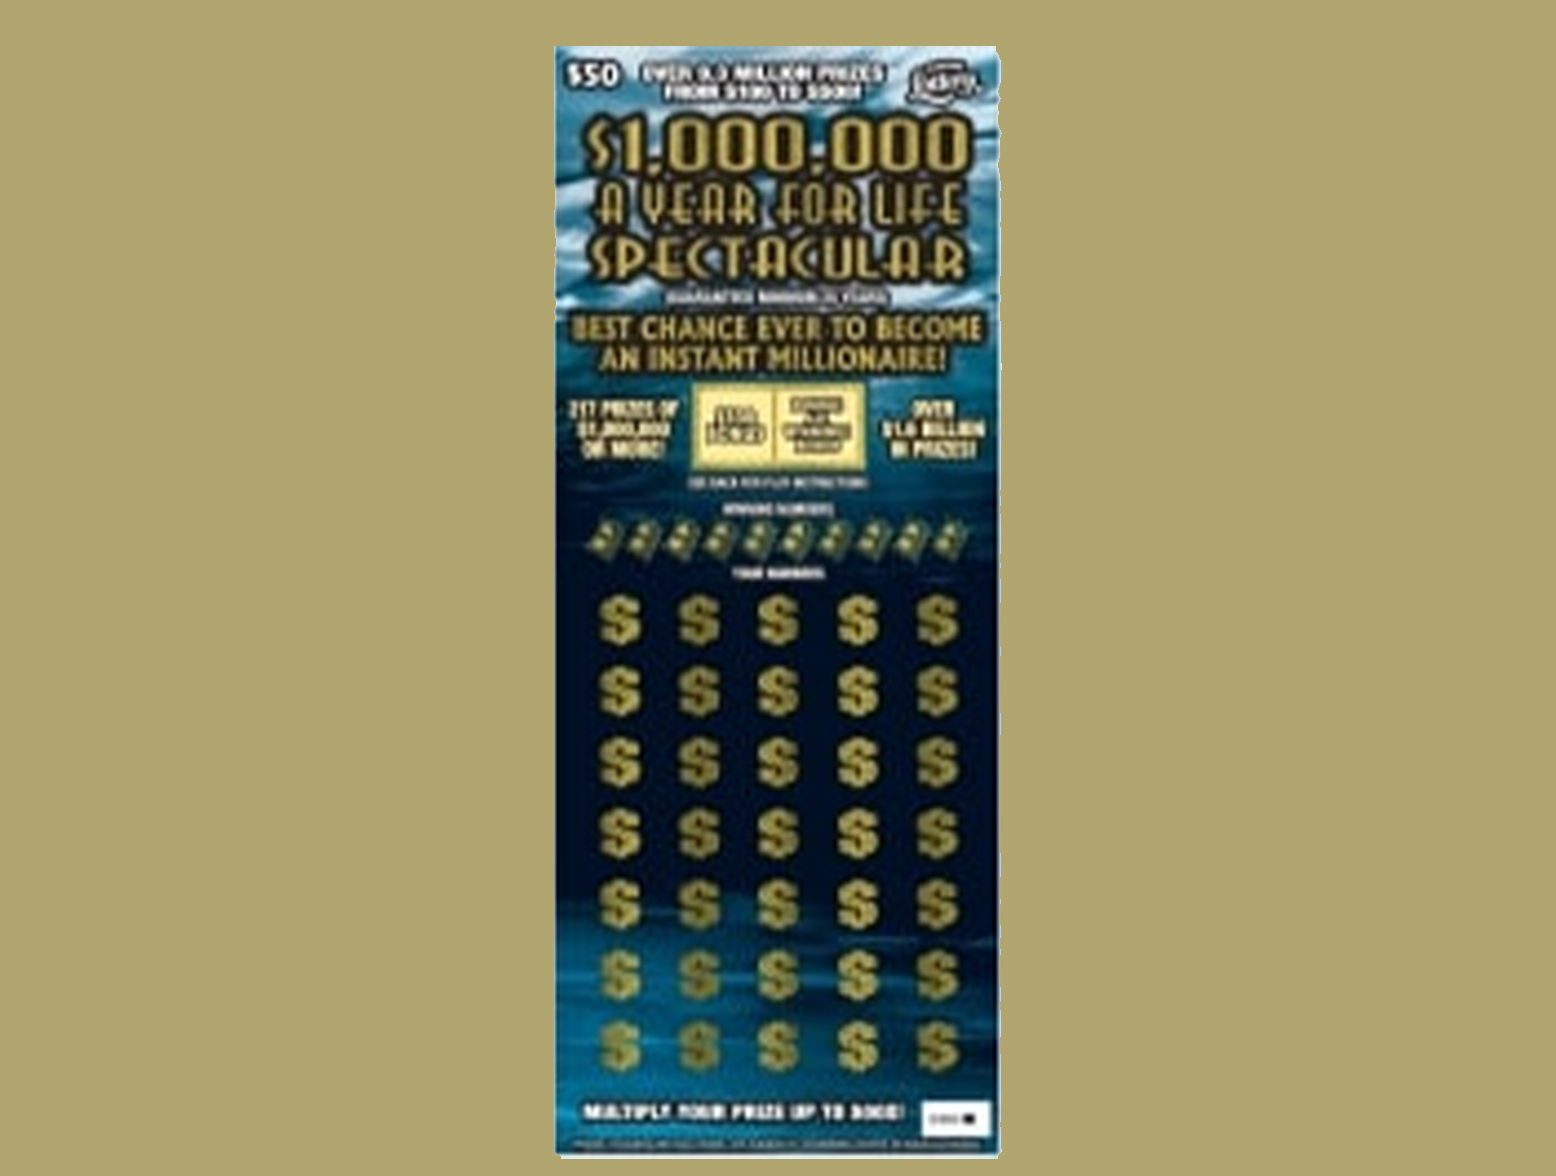 Feast Your Eyes on These NY Lottery Scratch-Offs w/Highest Prizes